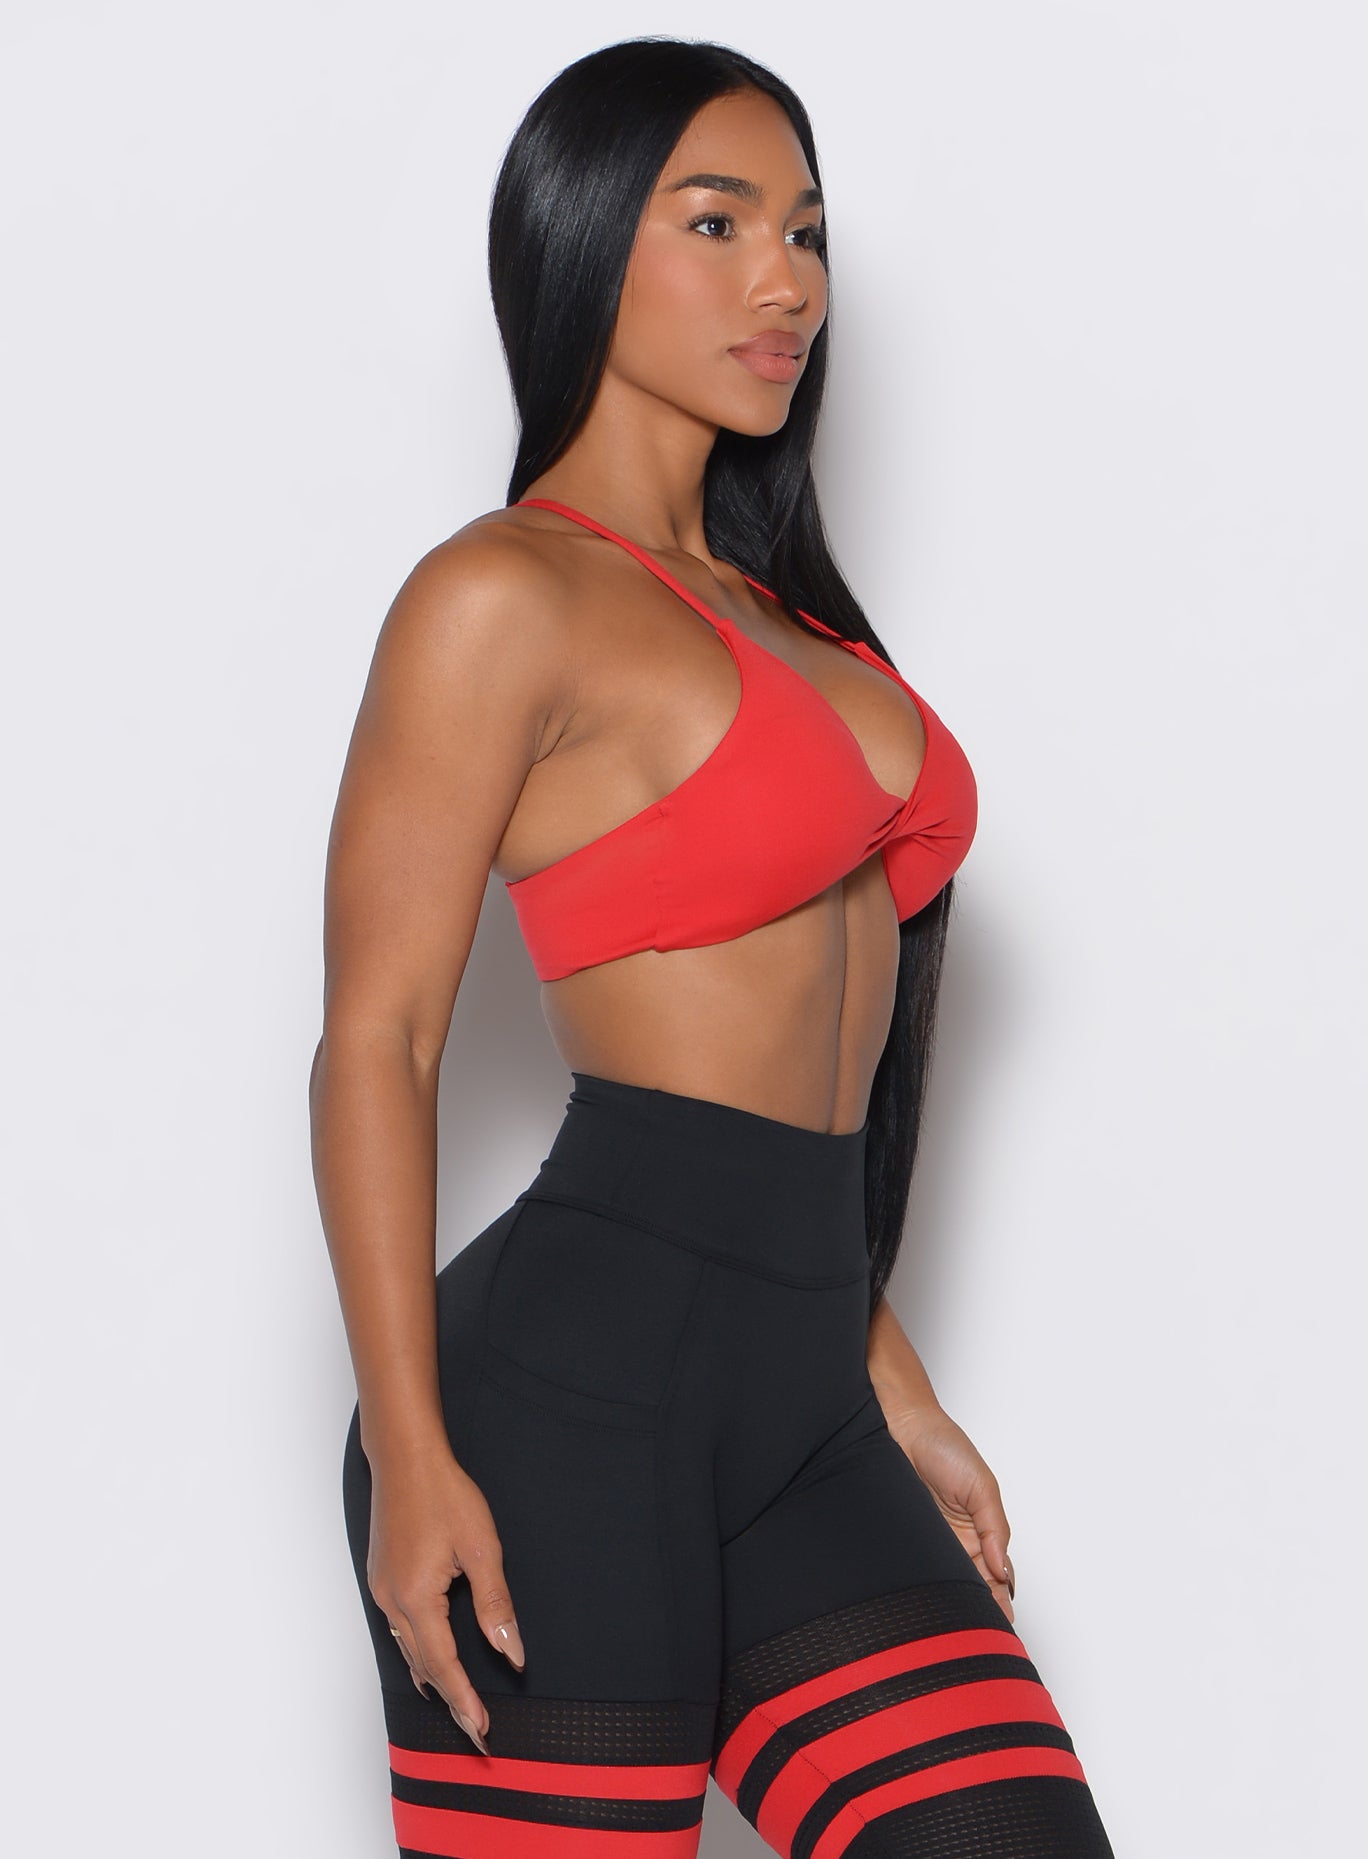 Right side profile view of a model wearing the Twist Mini  Bra in Fire color complemented by a matching thigh high 